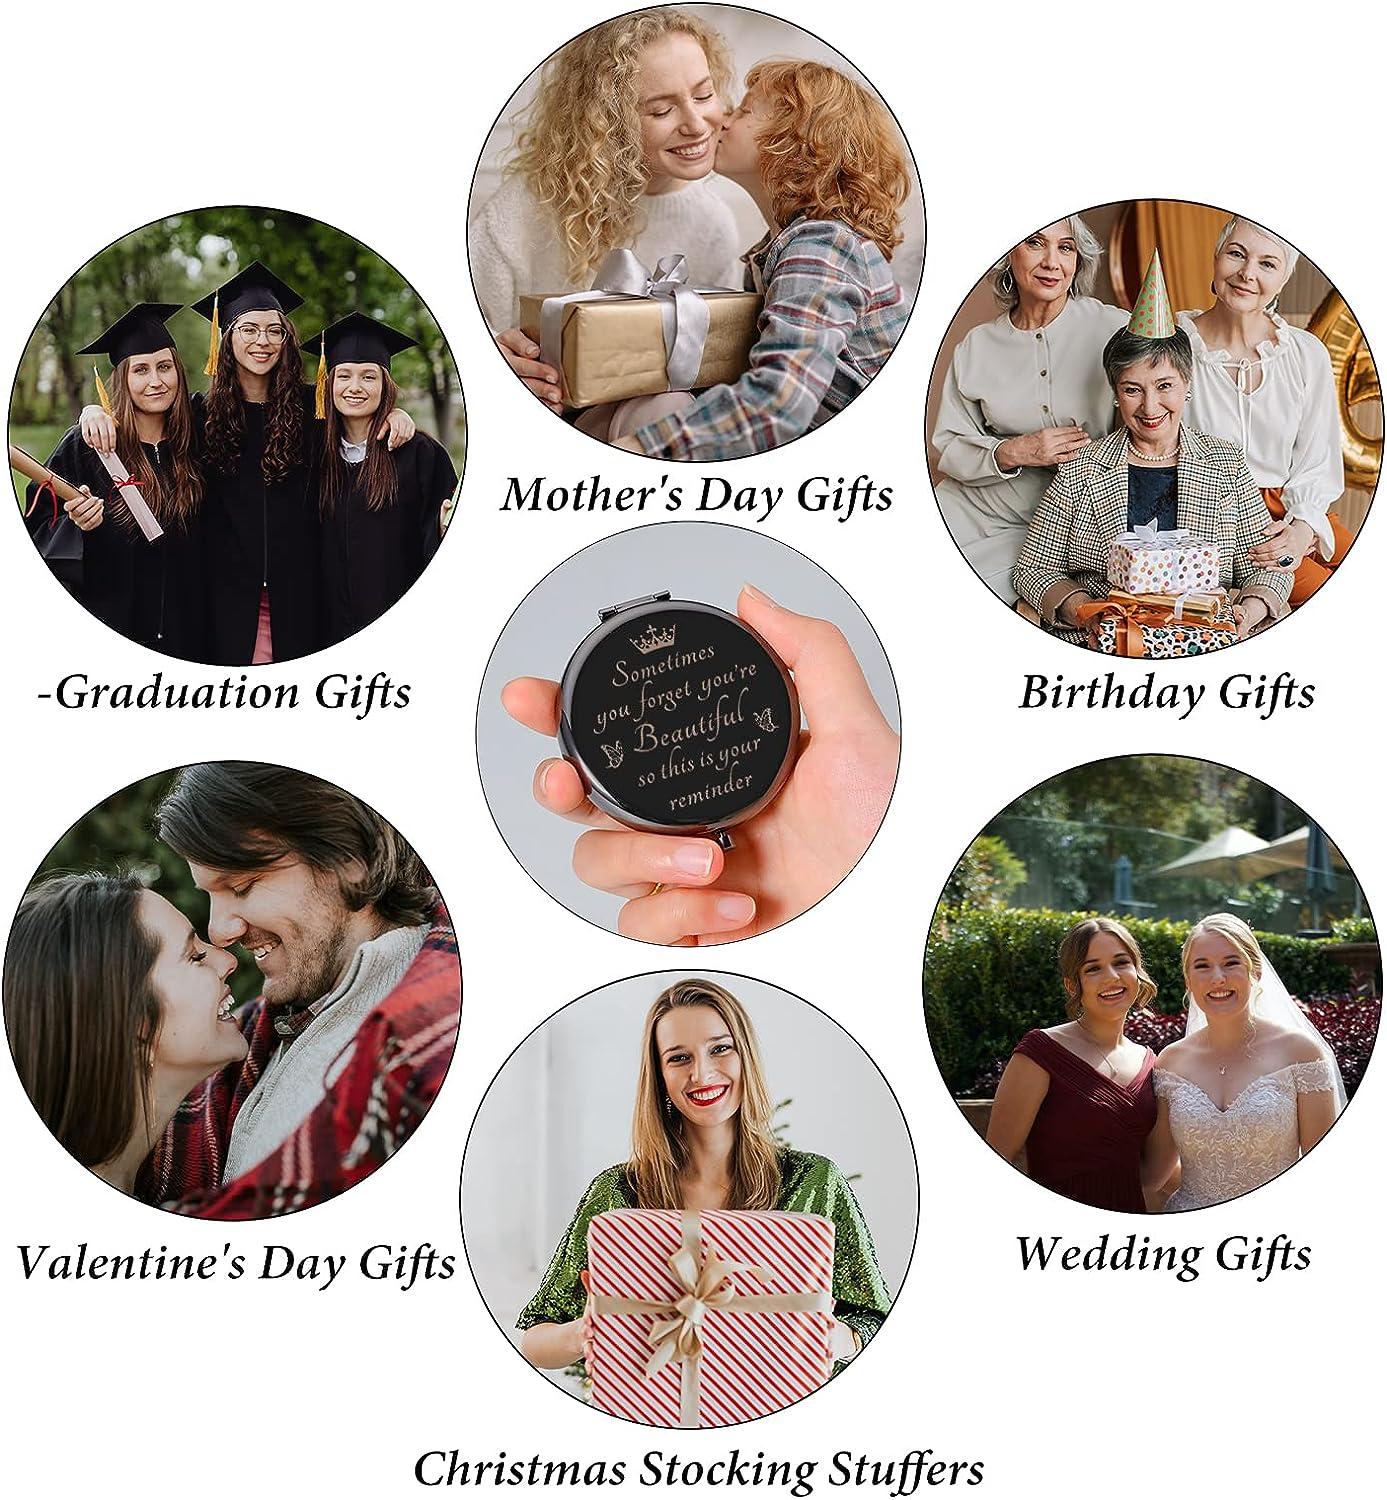 Valentines Day Gifts for Her - Valentines Day Gifts for Wife, Wife Valentines Day Gifts - Valentines Gifts for Her, Wife, Women - Wedding